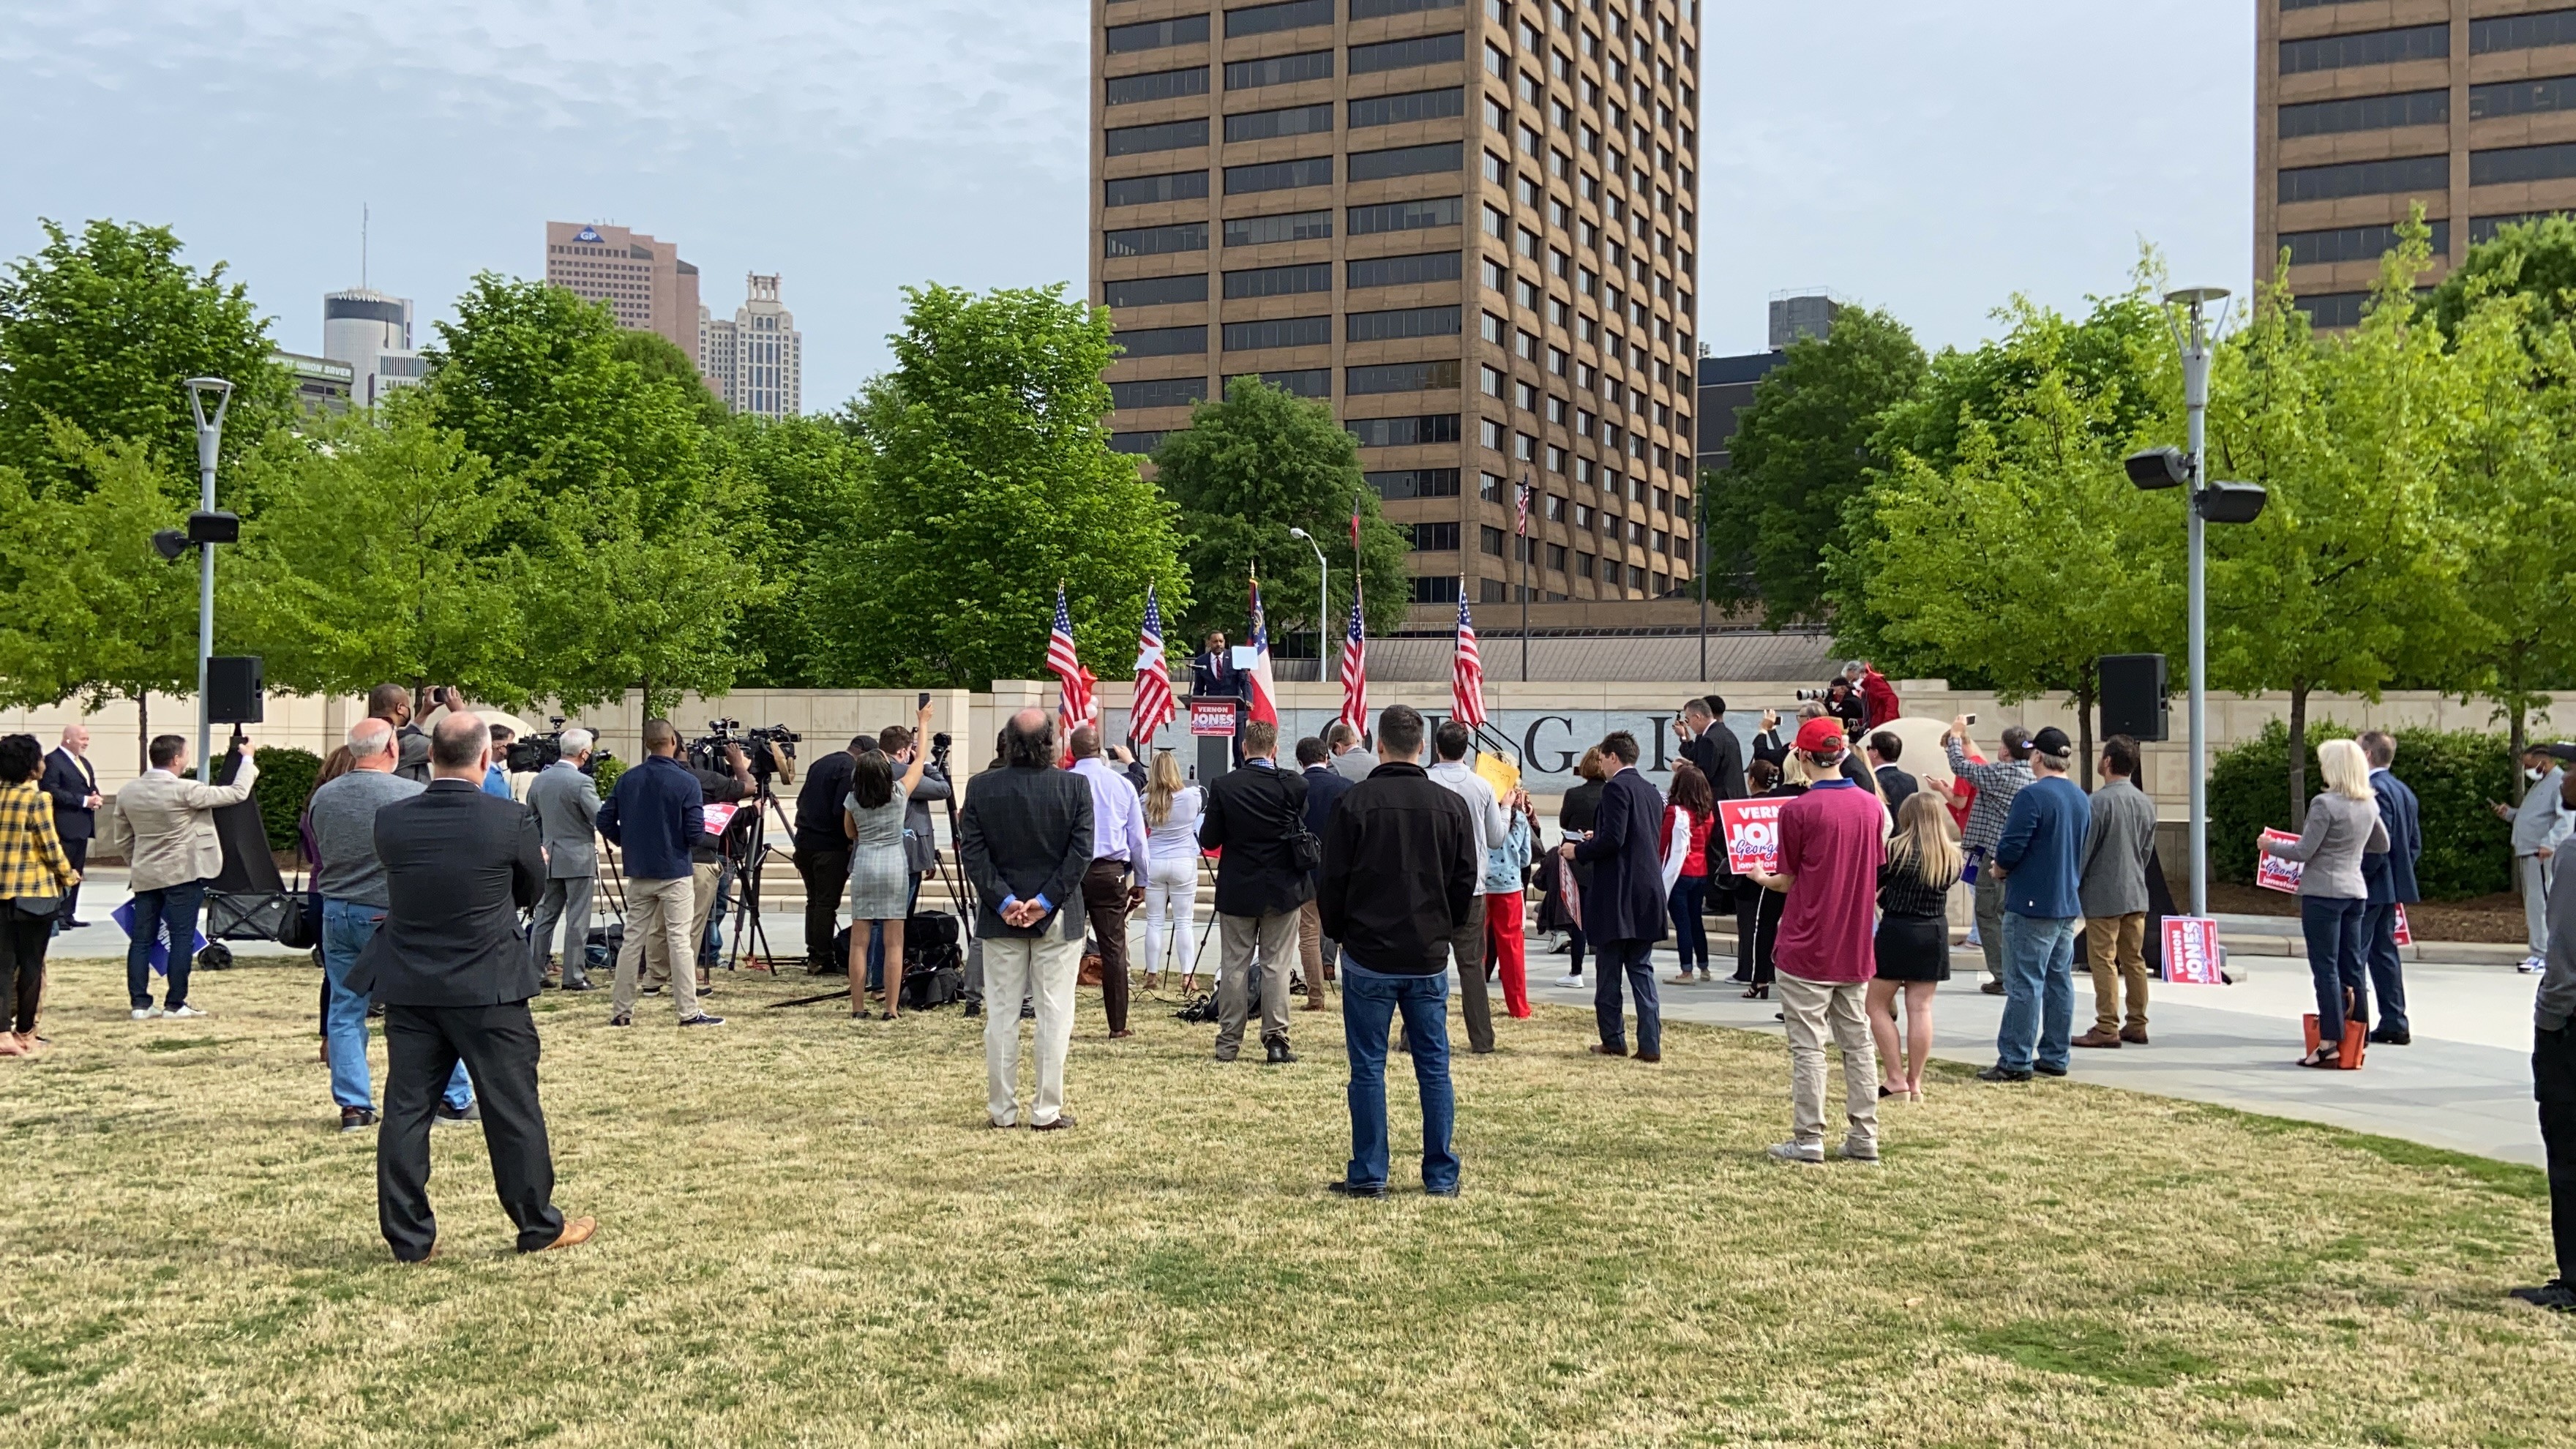 Speaking to a few dozen supporters Friday in the shadow of the Georgia state Capitol, Vernon Jones pitched himself as an alternative to the typical Republican and Democratic platforms. (Emma Hurt/WABE)